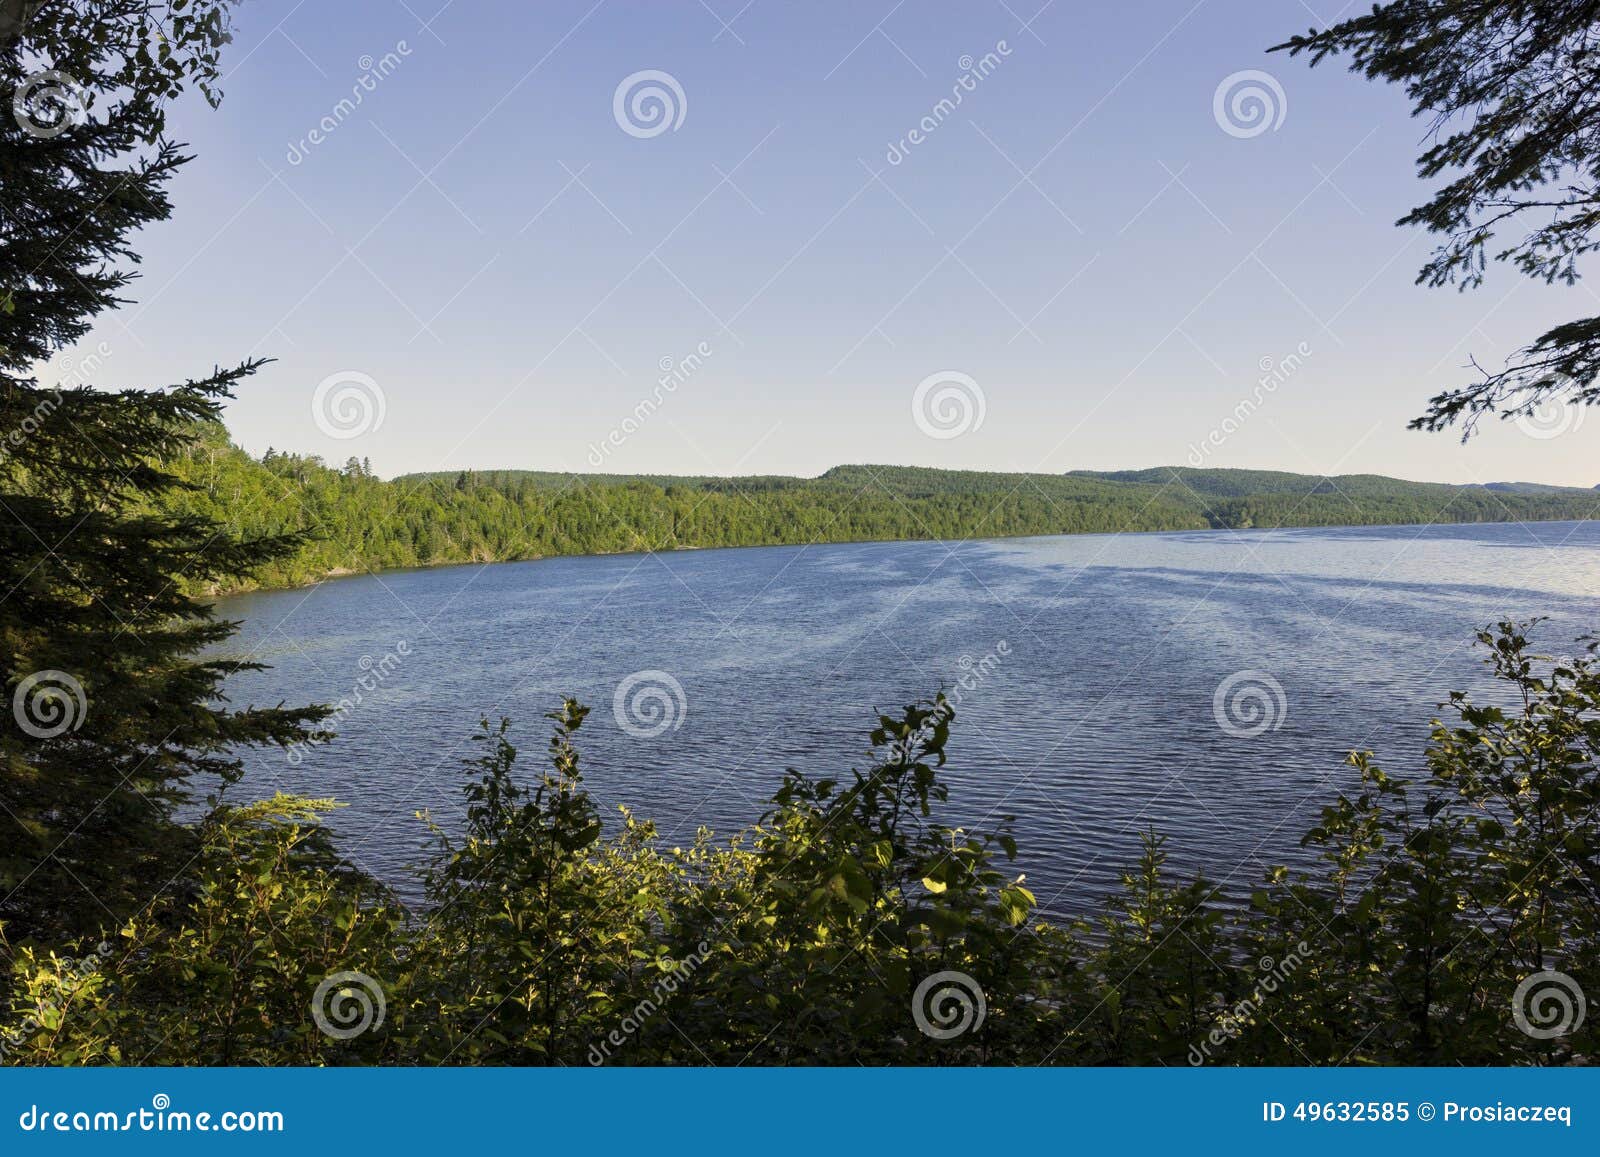 view of the lake in la mauricie national park